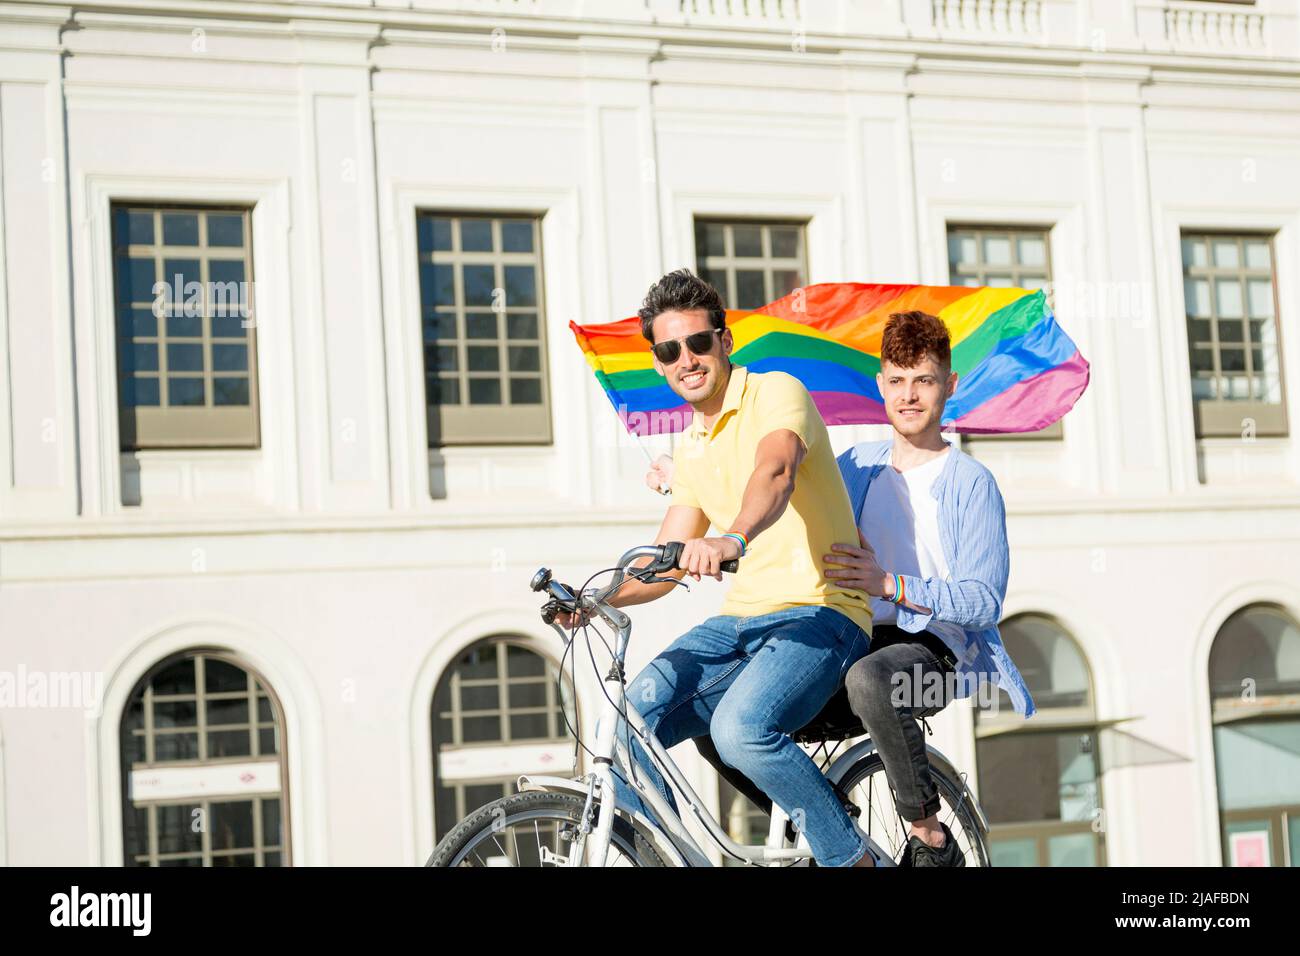 Young gay men couple riding bicycle with gay pride flag looking at camera outdoors. lgbt concept Stock Photo